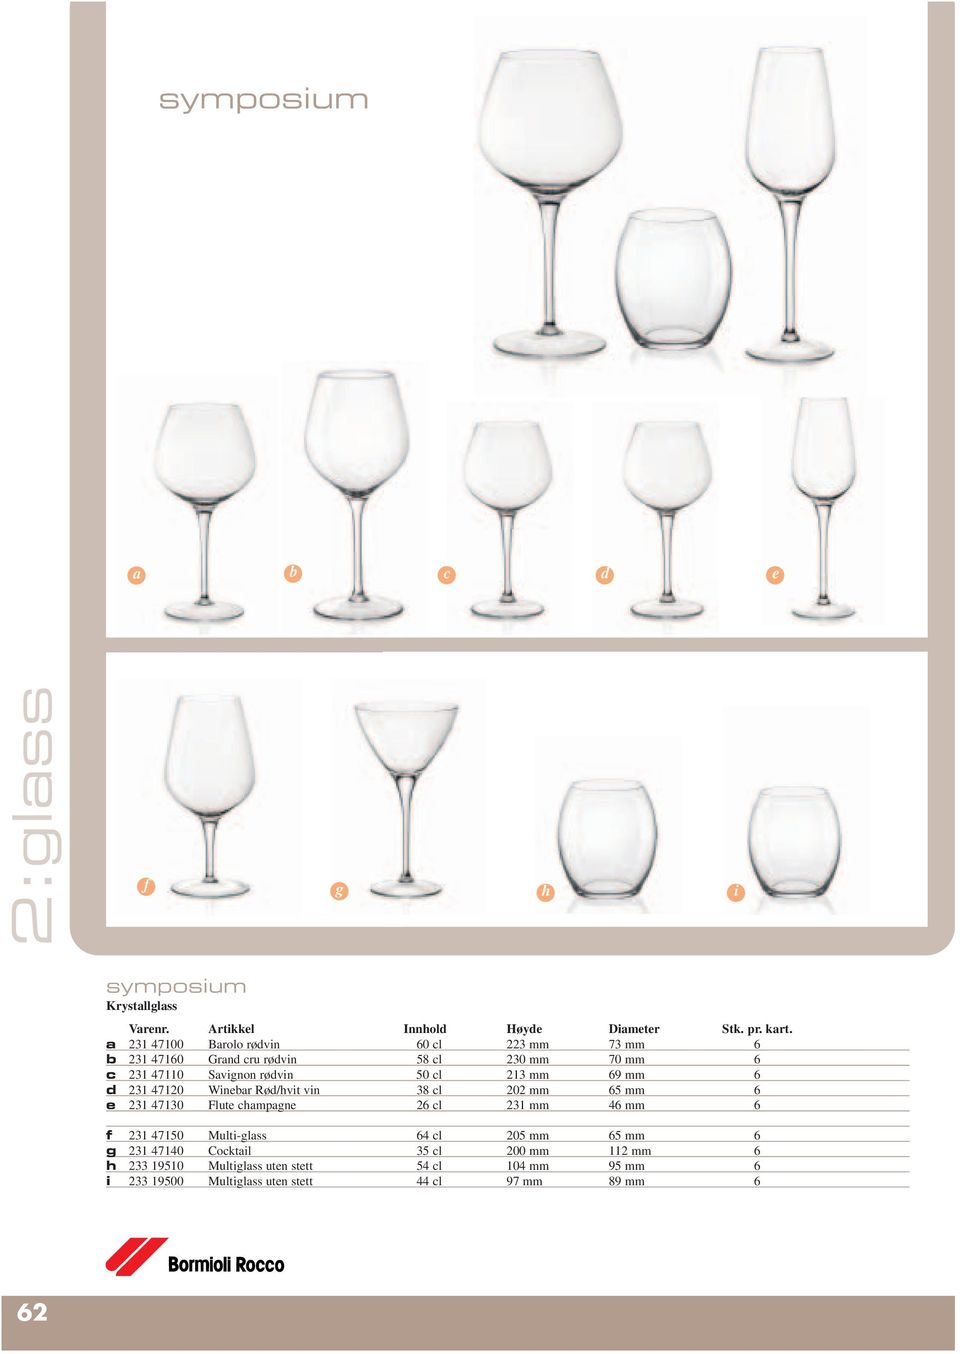 65 mm 6 e 231 47130 Flute champagne 26 cl 231 mm 46 mm 6 f 231 47150 Multi-glass 64 cl 205 mm 65 mm 6 g 231 47140 Cocktail